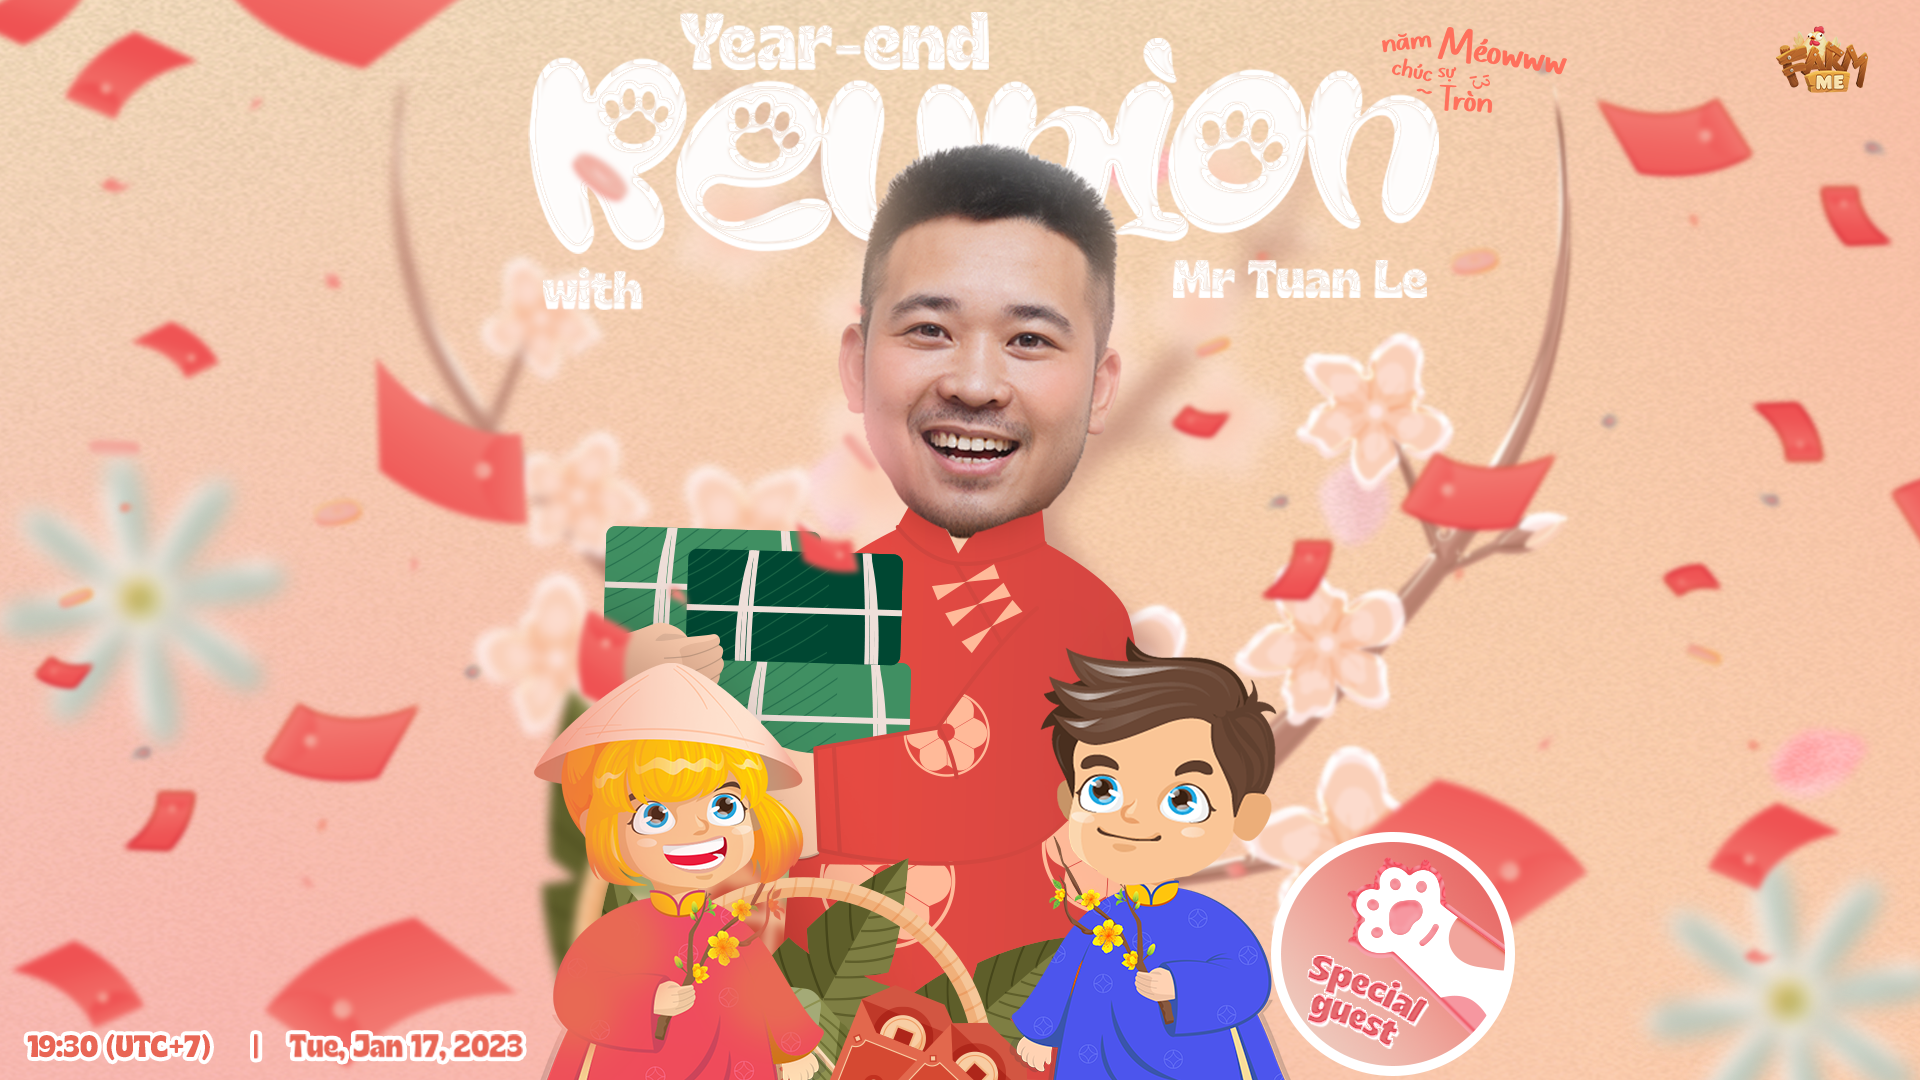 FARM ME RECAP: YEAR-END GET TOGETHER WITH CPO TUAN LE